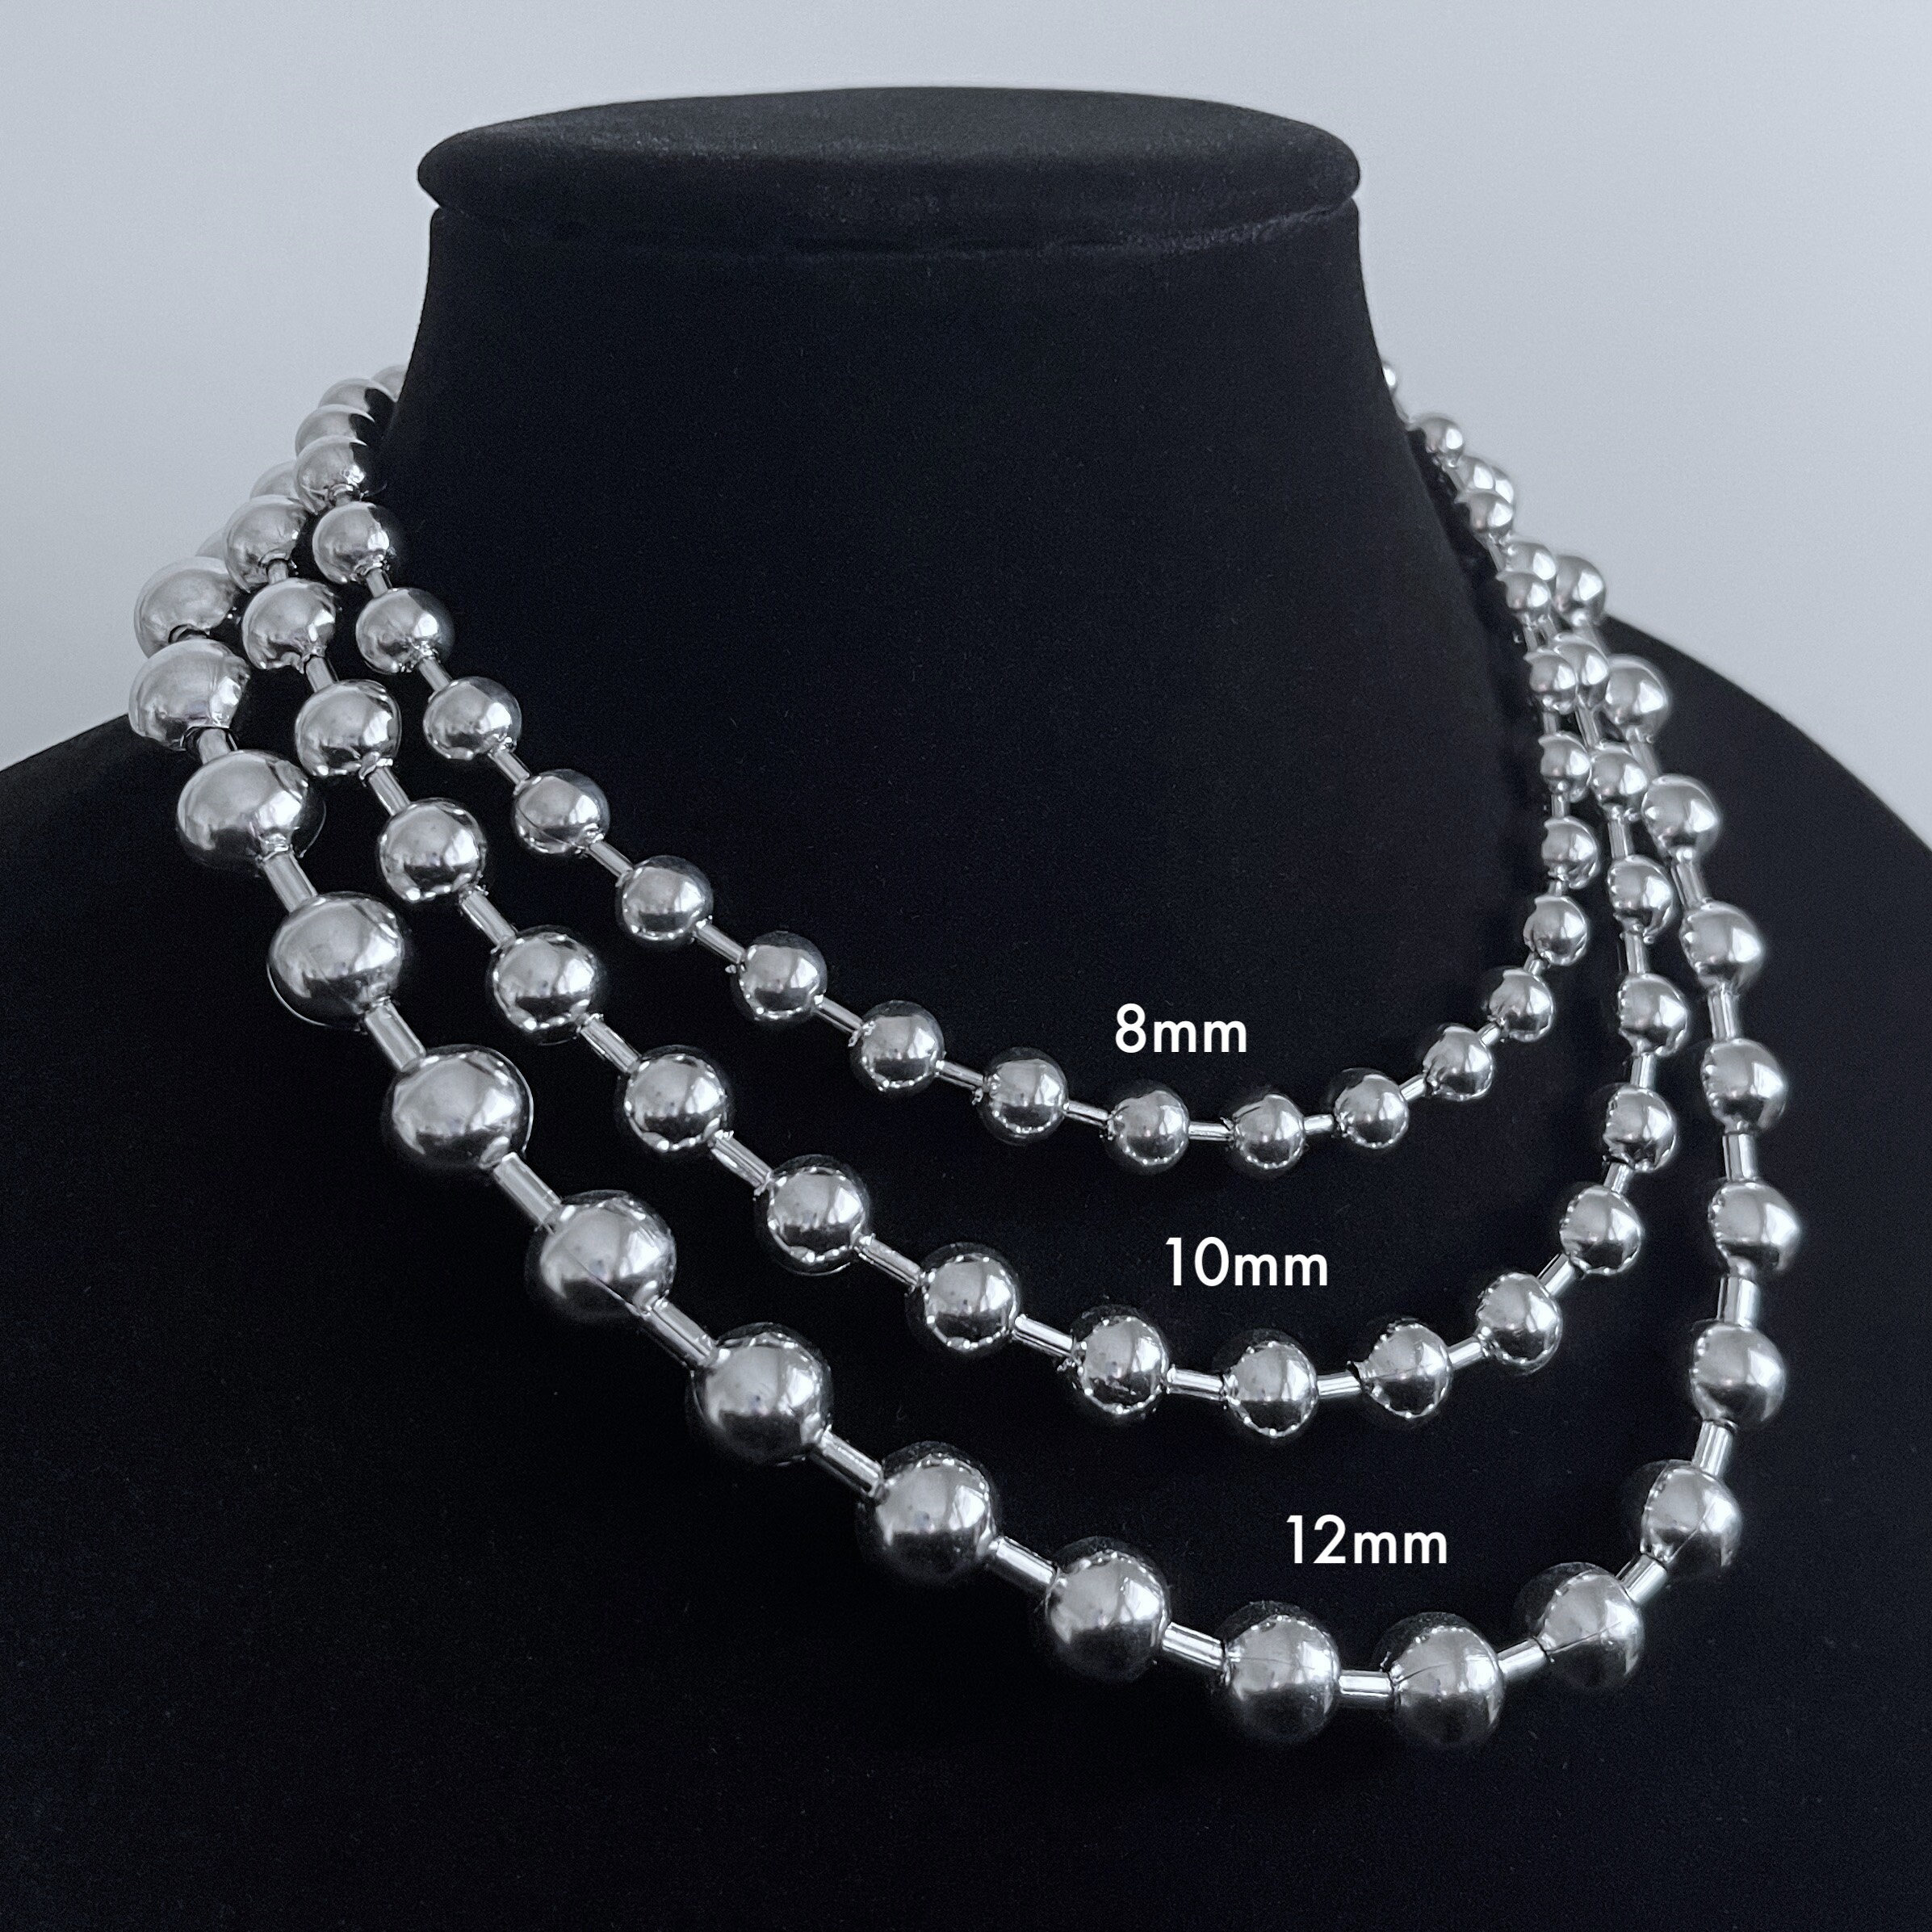 Extra Ultra Large 9.5mm Stainless Steel Ball Chain Necklace, Heavy, Metal Beads, Men's Women's Unisex, 90's Ball Chain, Rocker